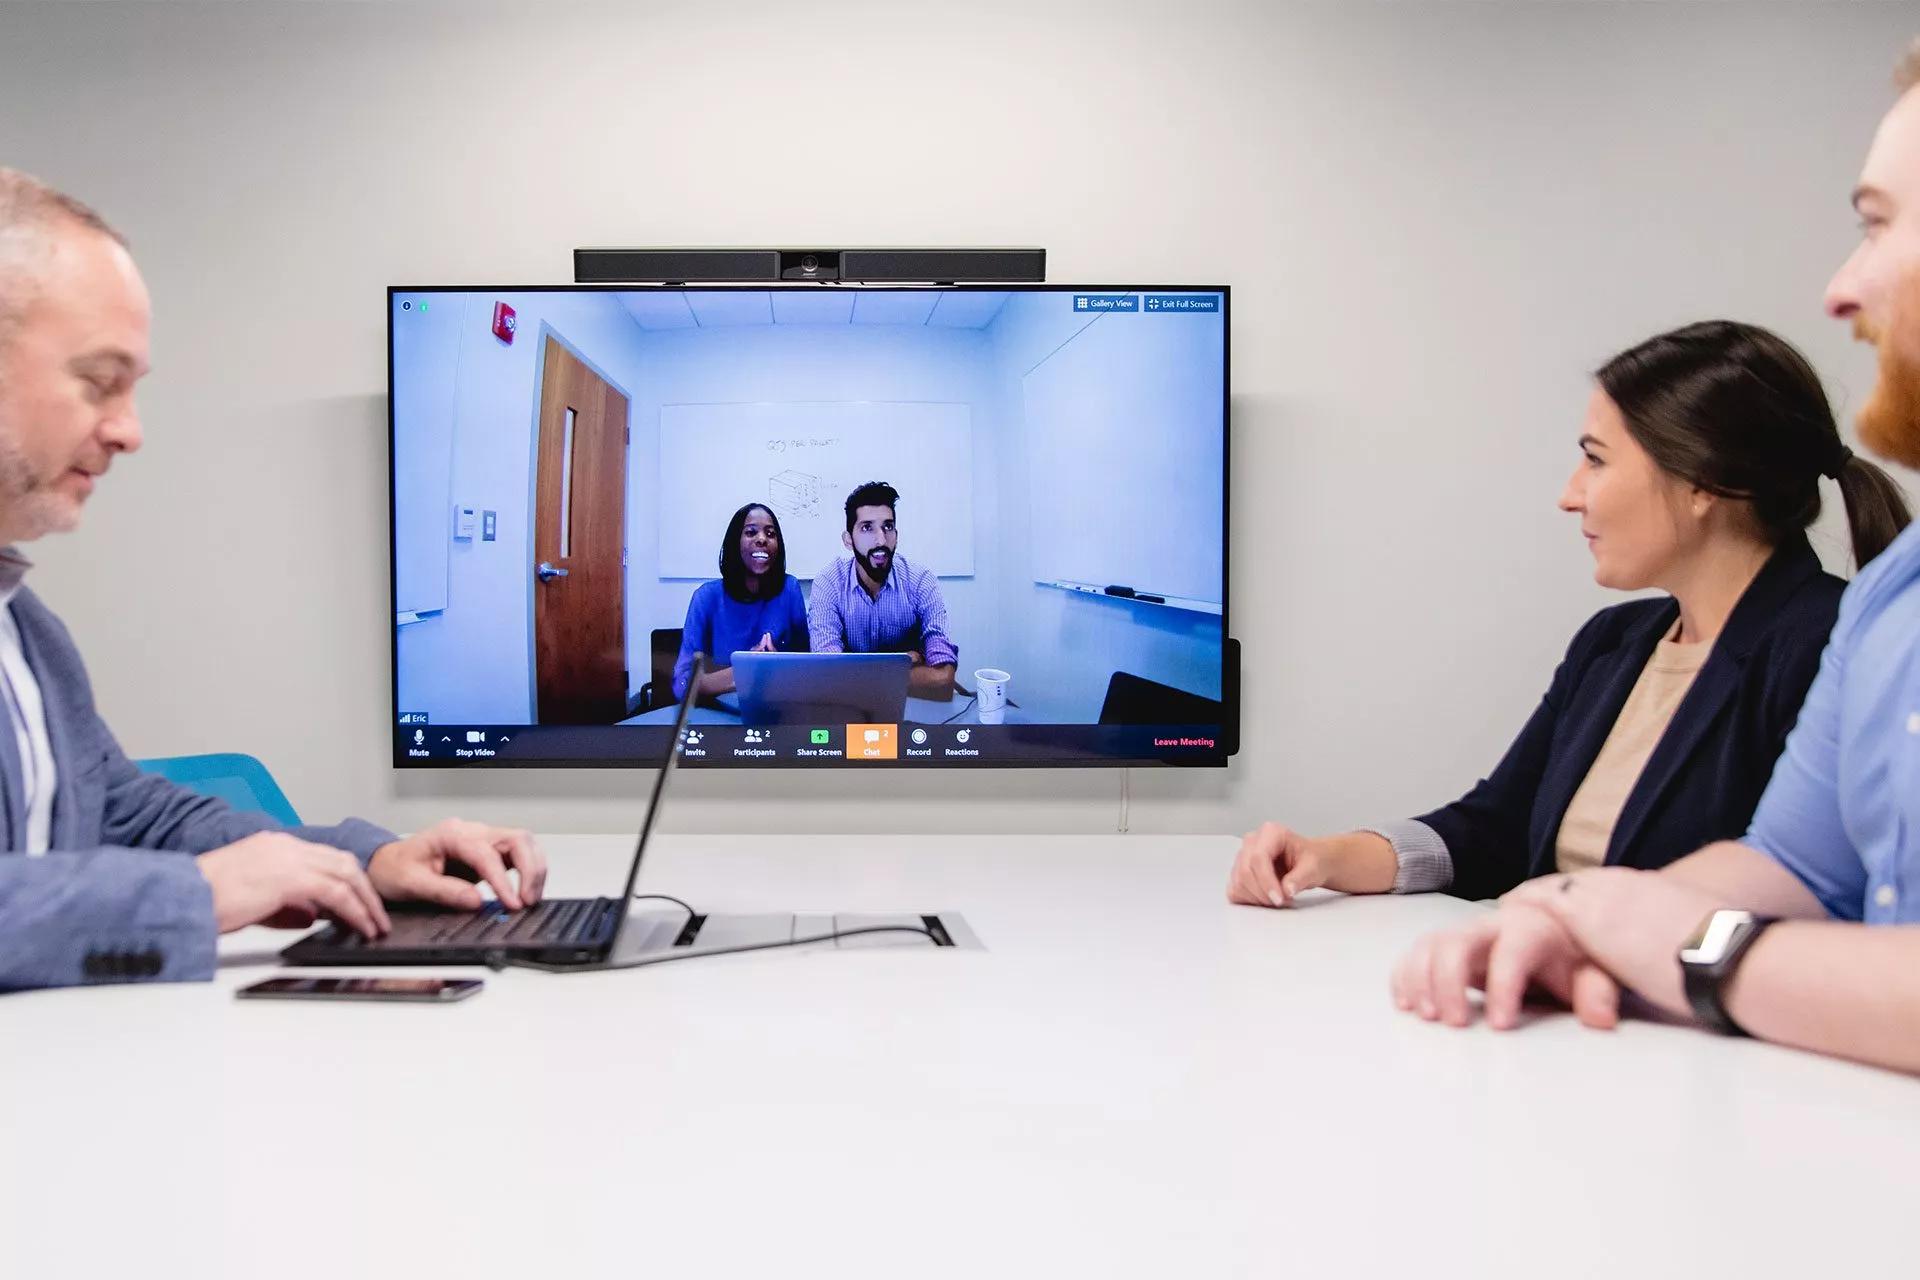 A group of employees sits in a videoconference meeting and view a screen